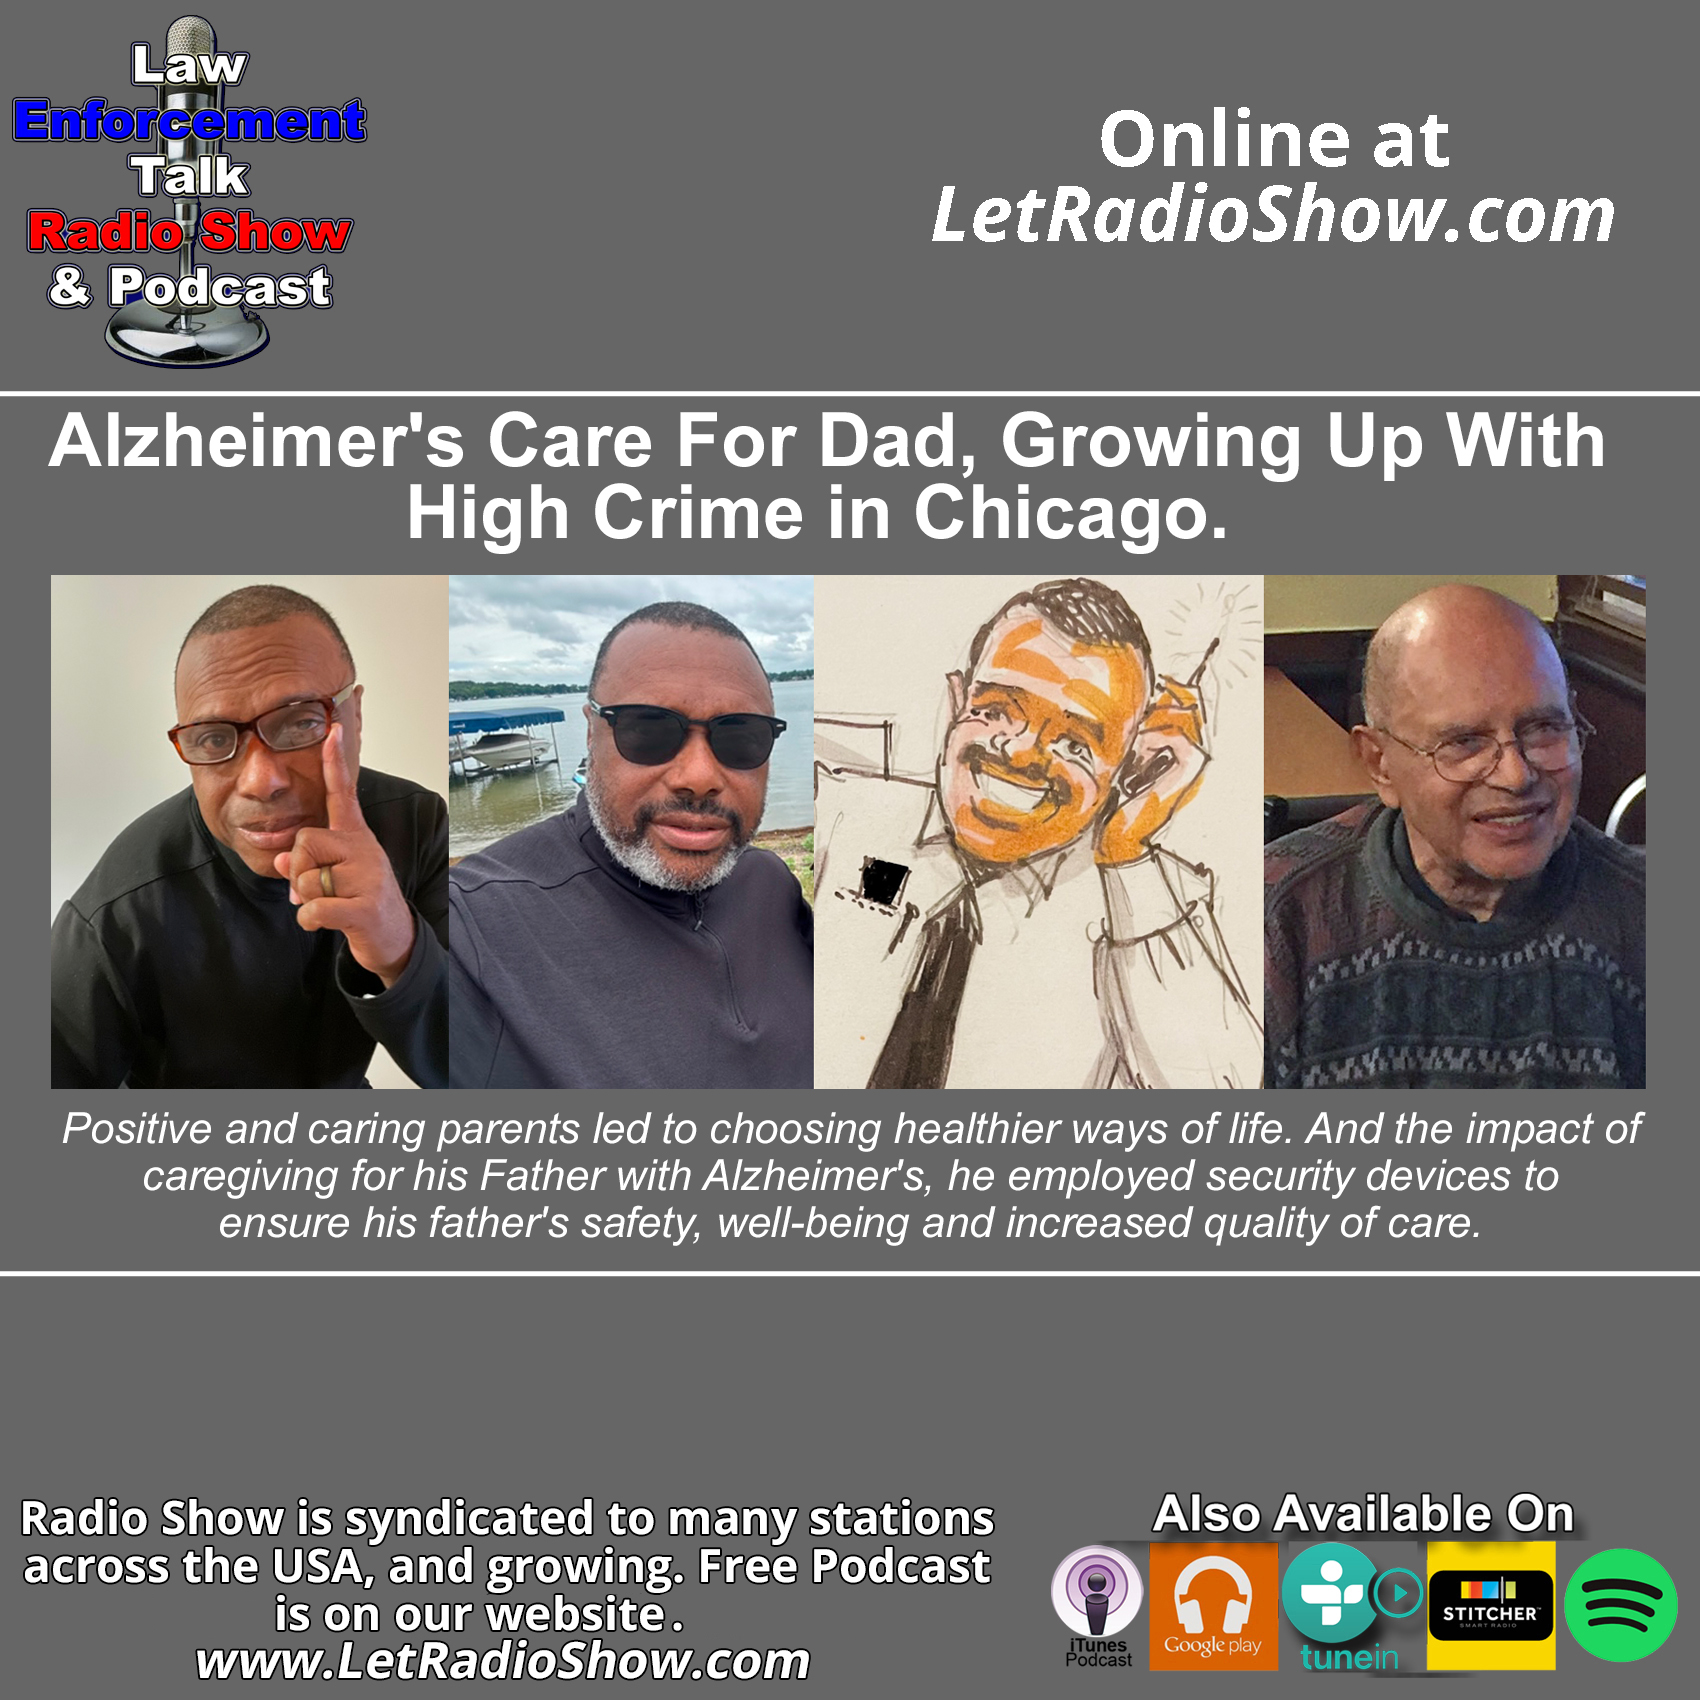 Alzheimers Care For Dad, Growing Up With High Crime in Chicago.